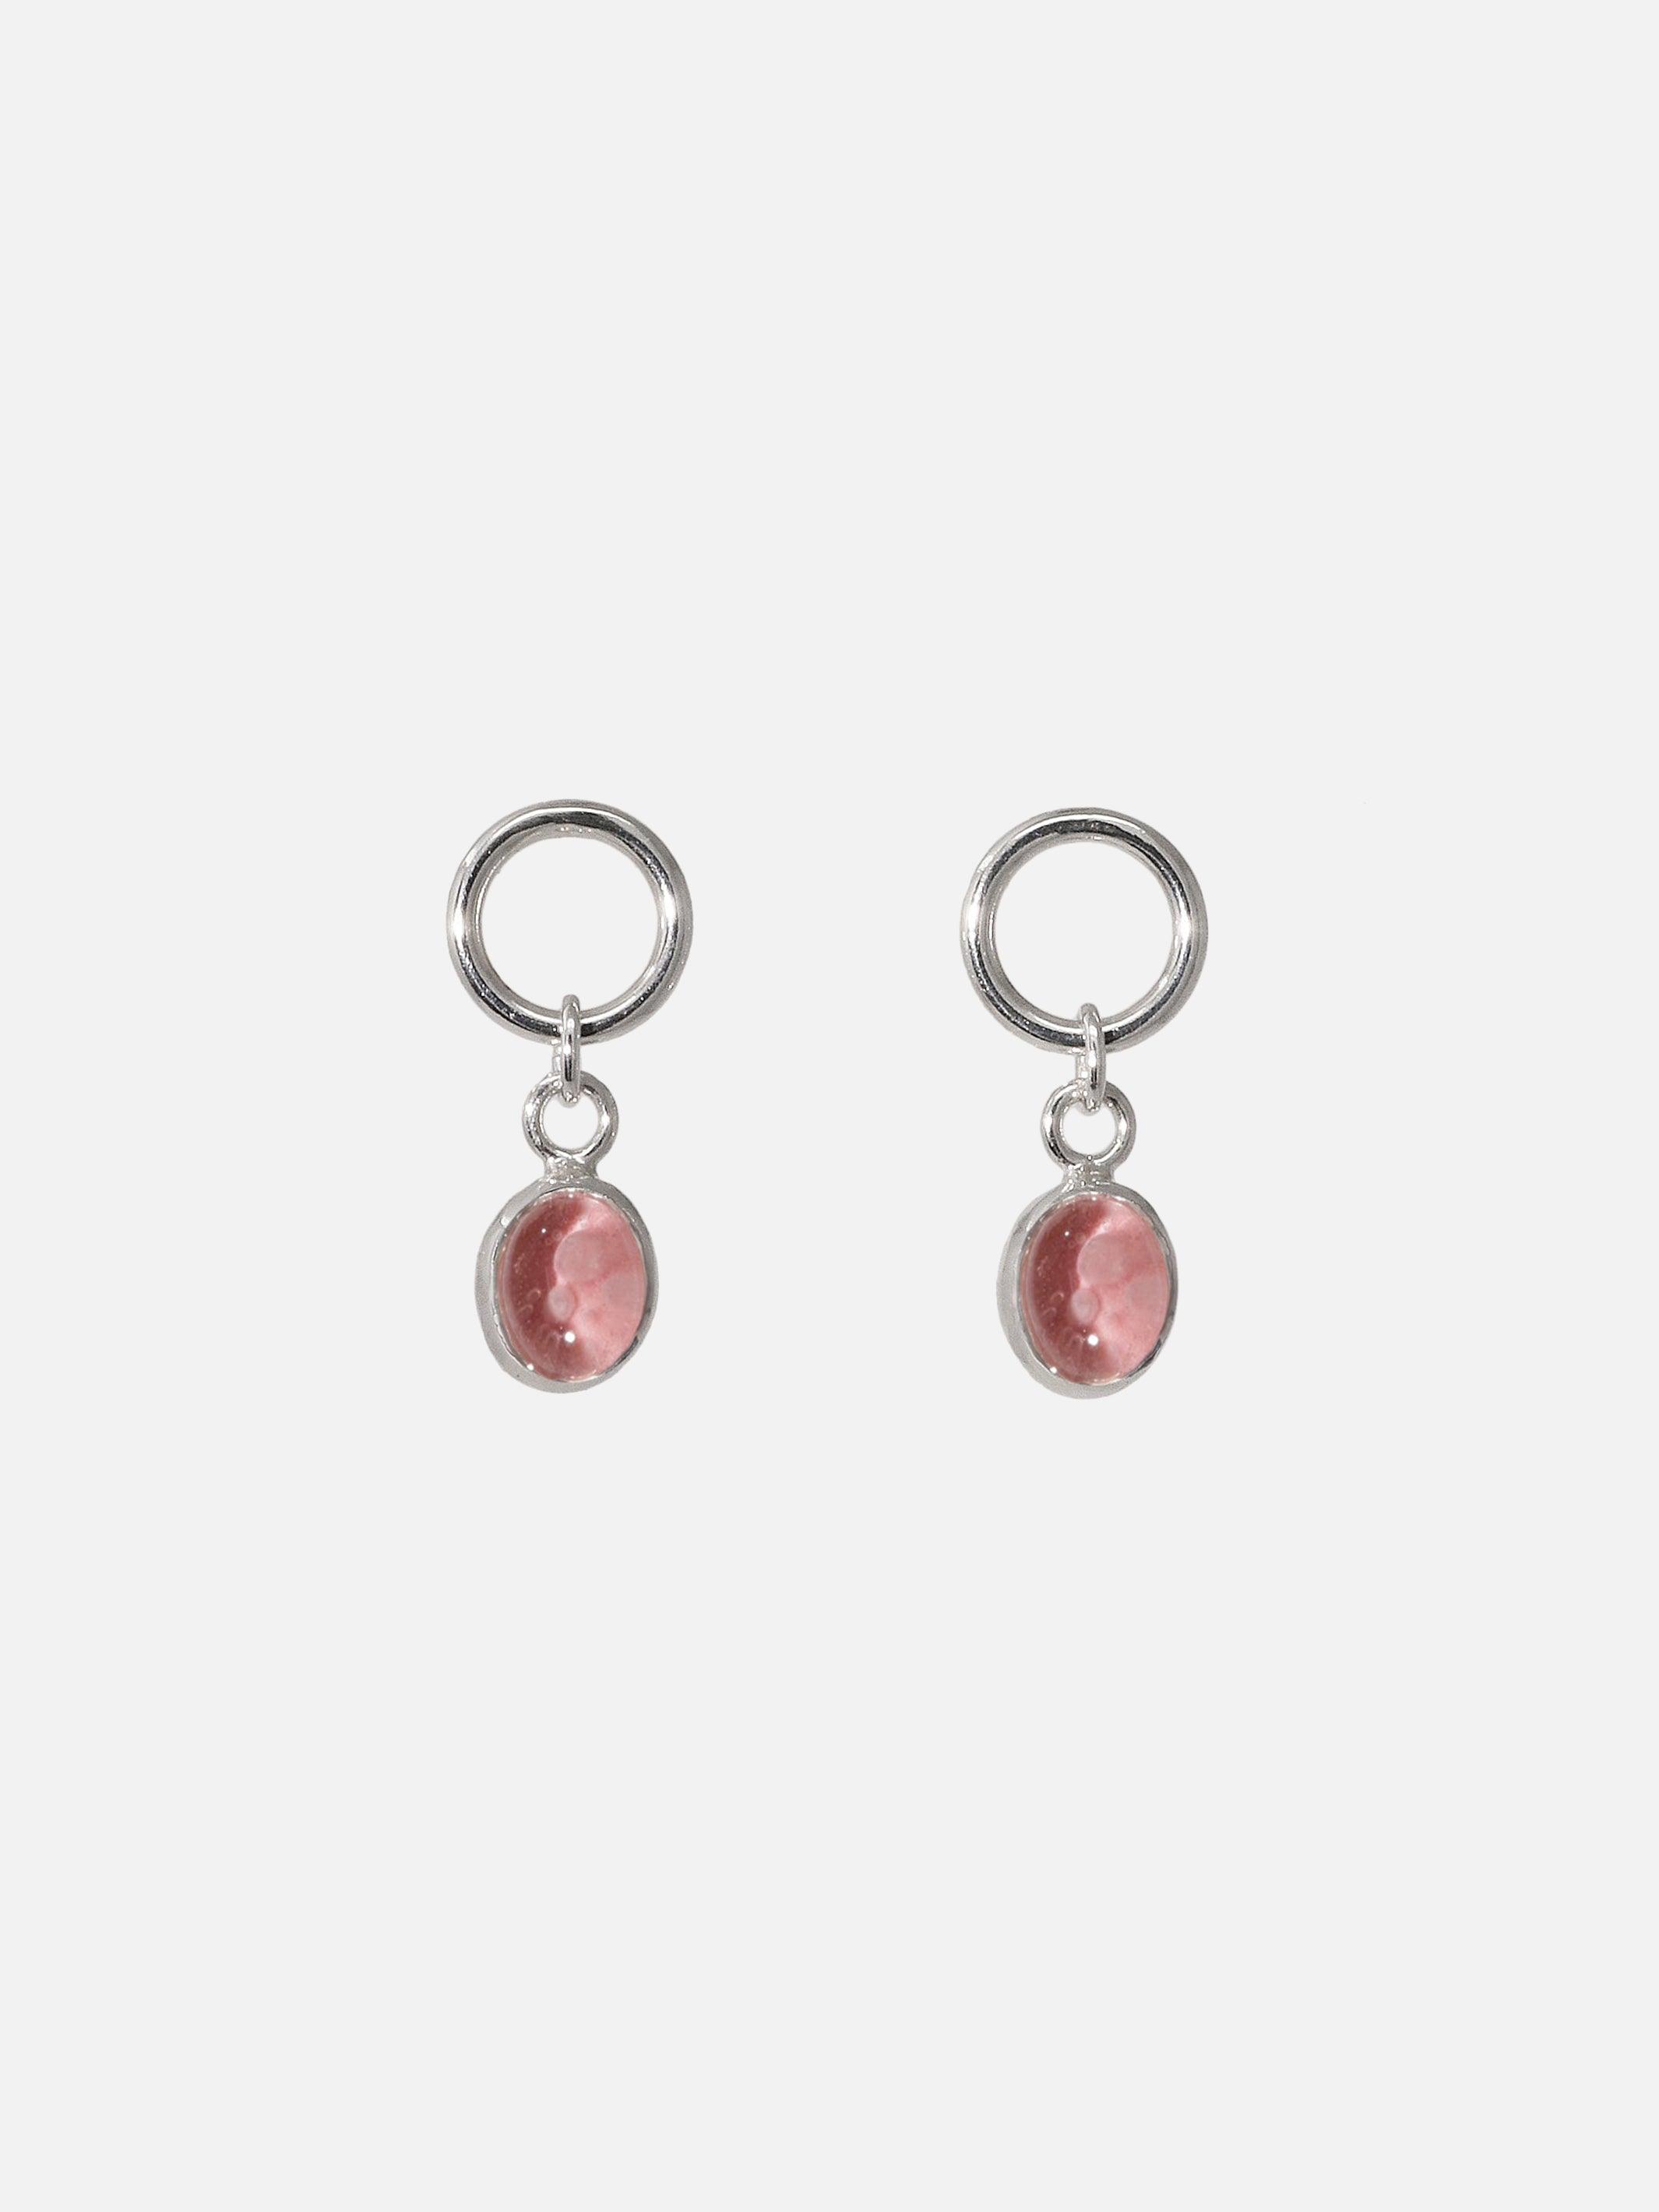 Oval Dangling Earrings - CLED - At Present